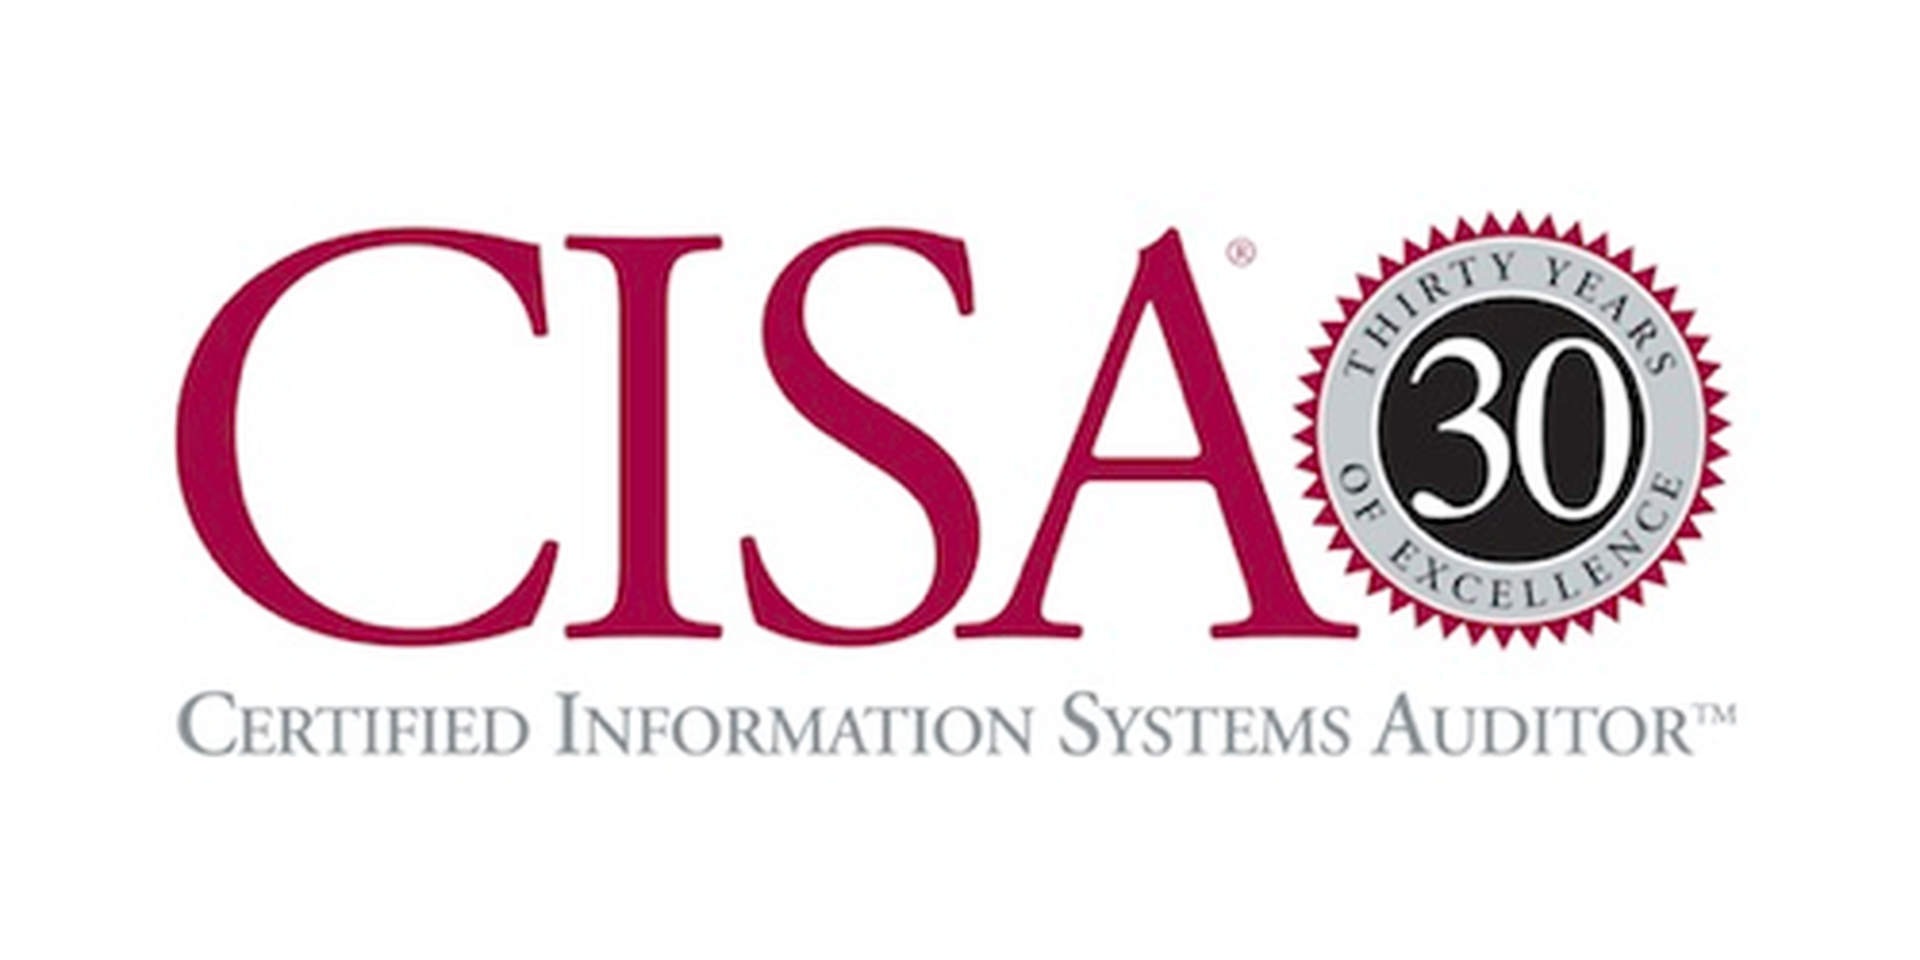 &#8220;The fifth highest-paying certification is also from ISACA, and this one is for IS auditors,&#8221; said Hales. &#8220;CISA certification is ISACA&#8217;s oldest, dating back to 1978, with more than 106,000 people certified since its inception. CISA certification requires at least five years of experience in IS auditing, control, or security ...